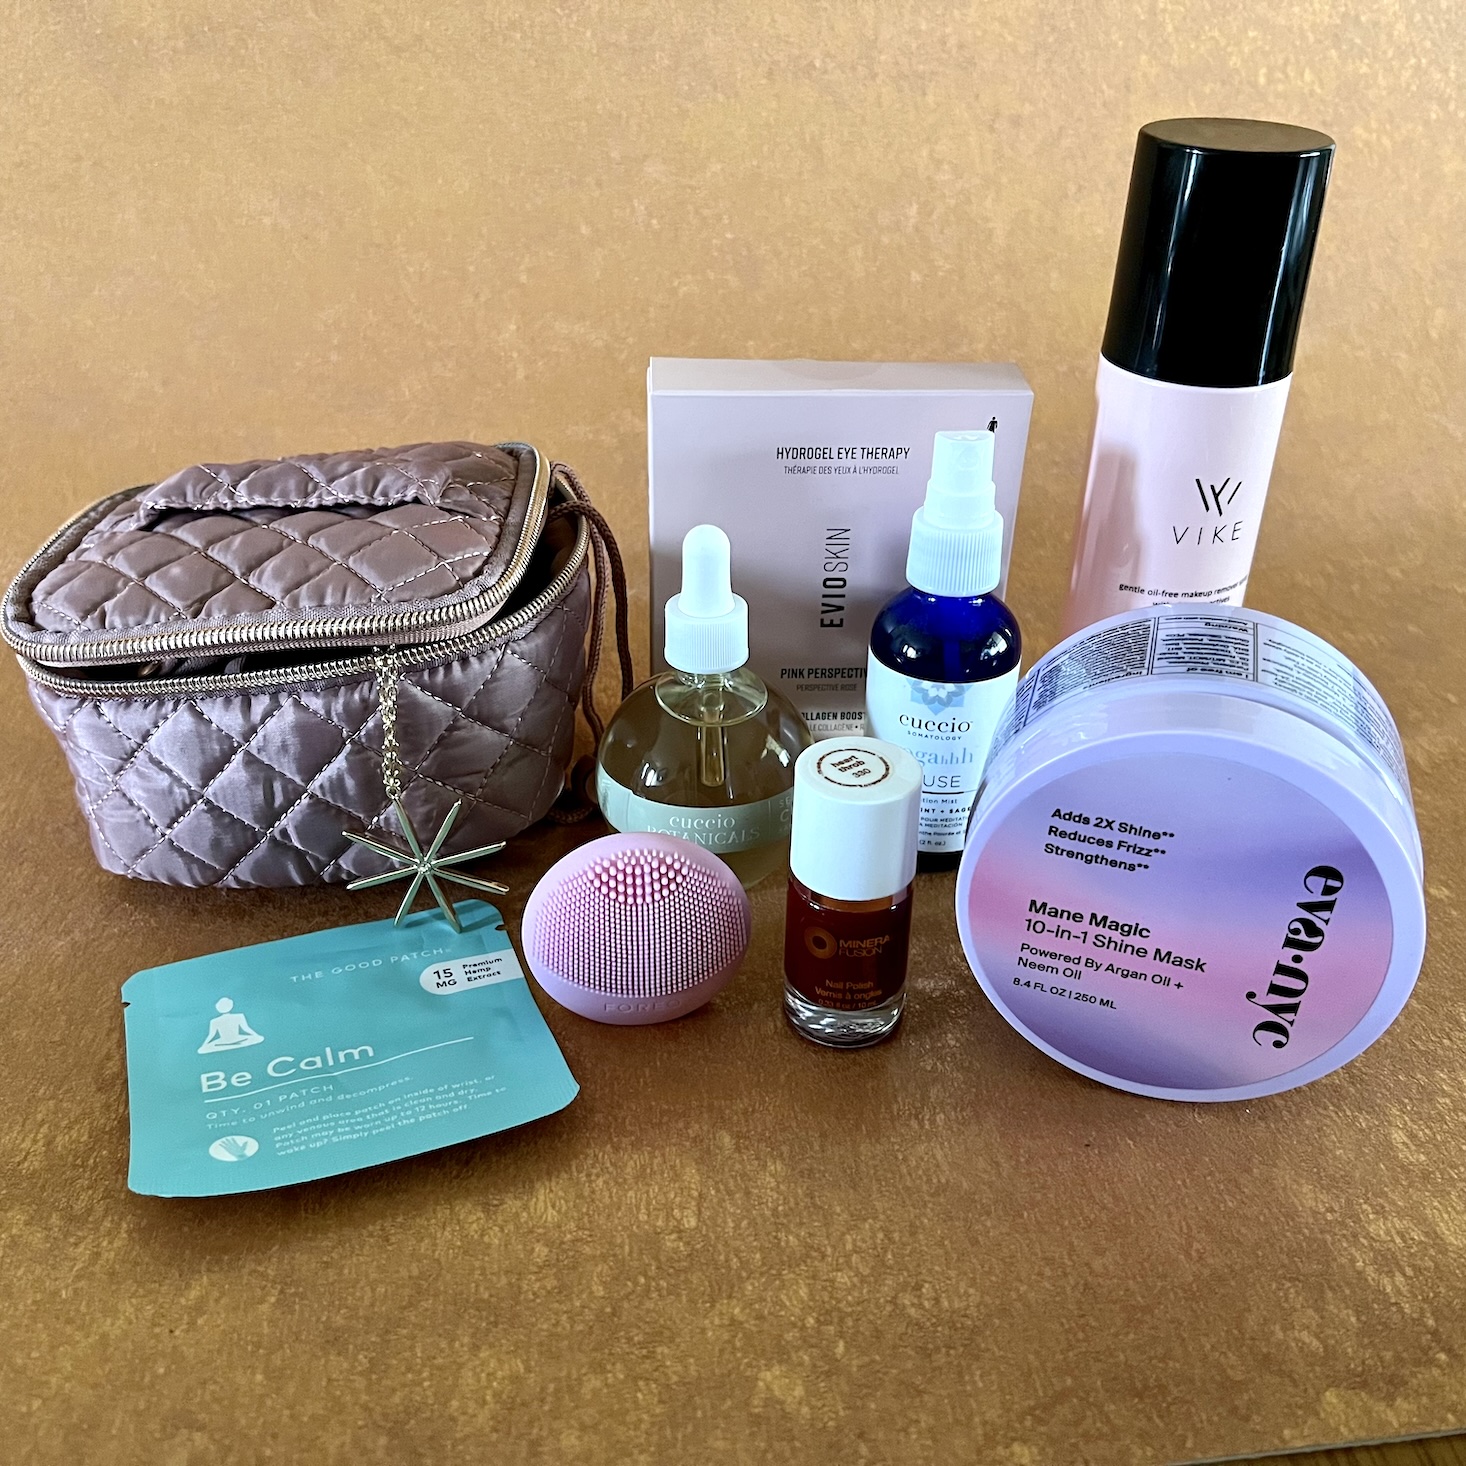 KND by Kinder Beauty Lifestyle Review: “Holiday Edition” Box